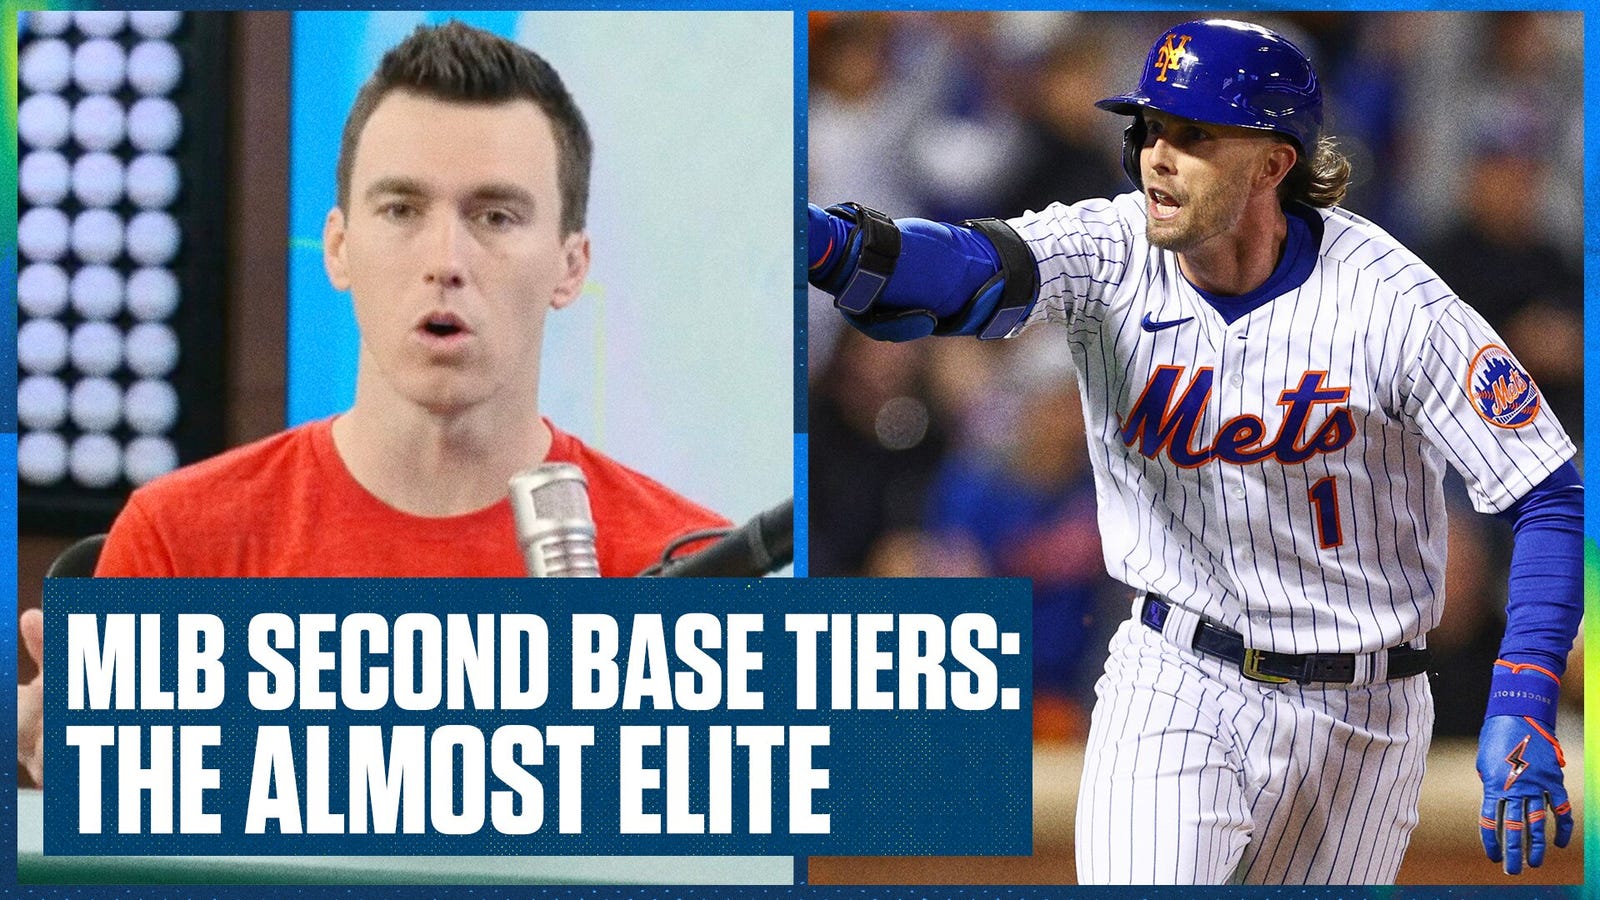 MLB Second Base Tiers: 'The Almost Elite' 